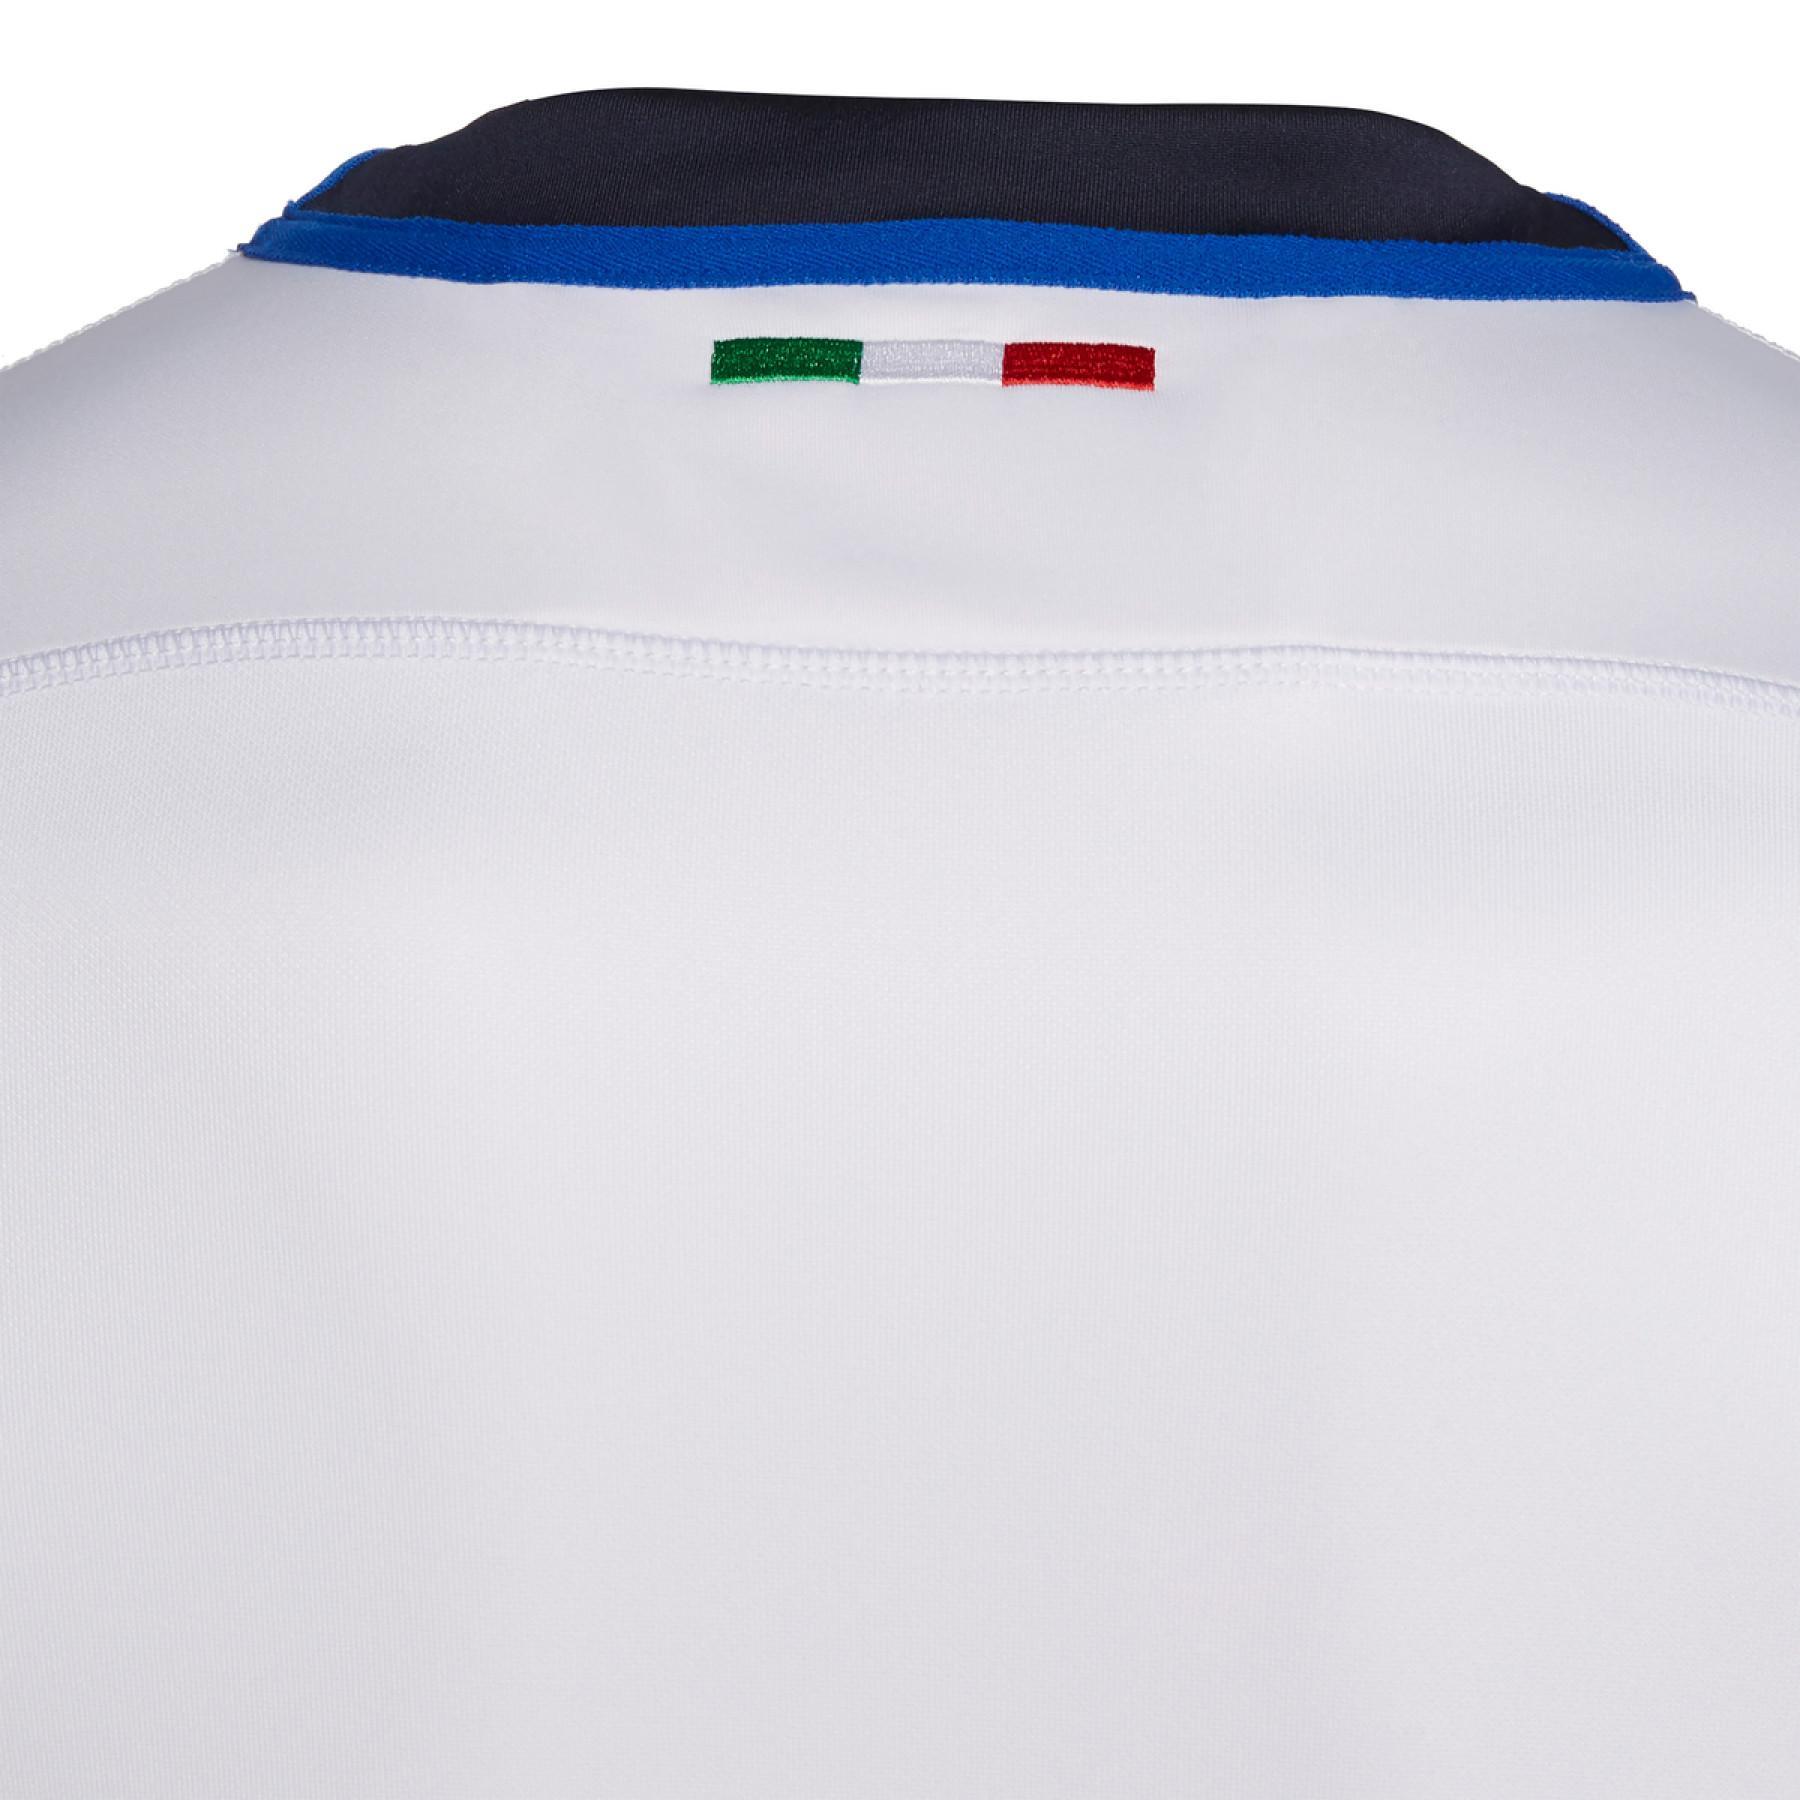 Outdoor jersey Italie rugby 2019